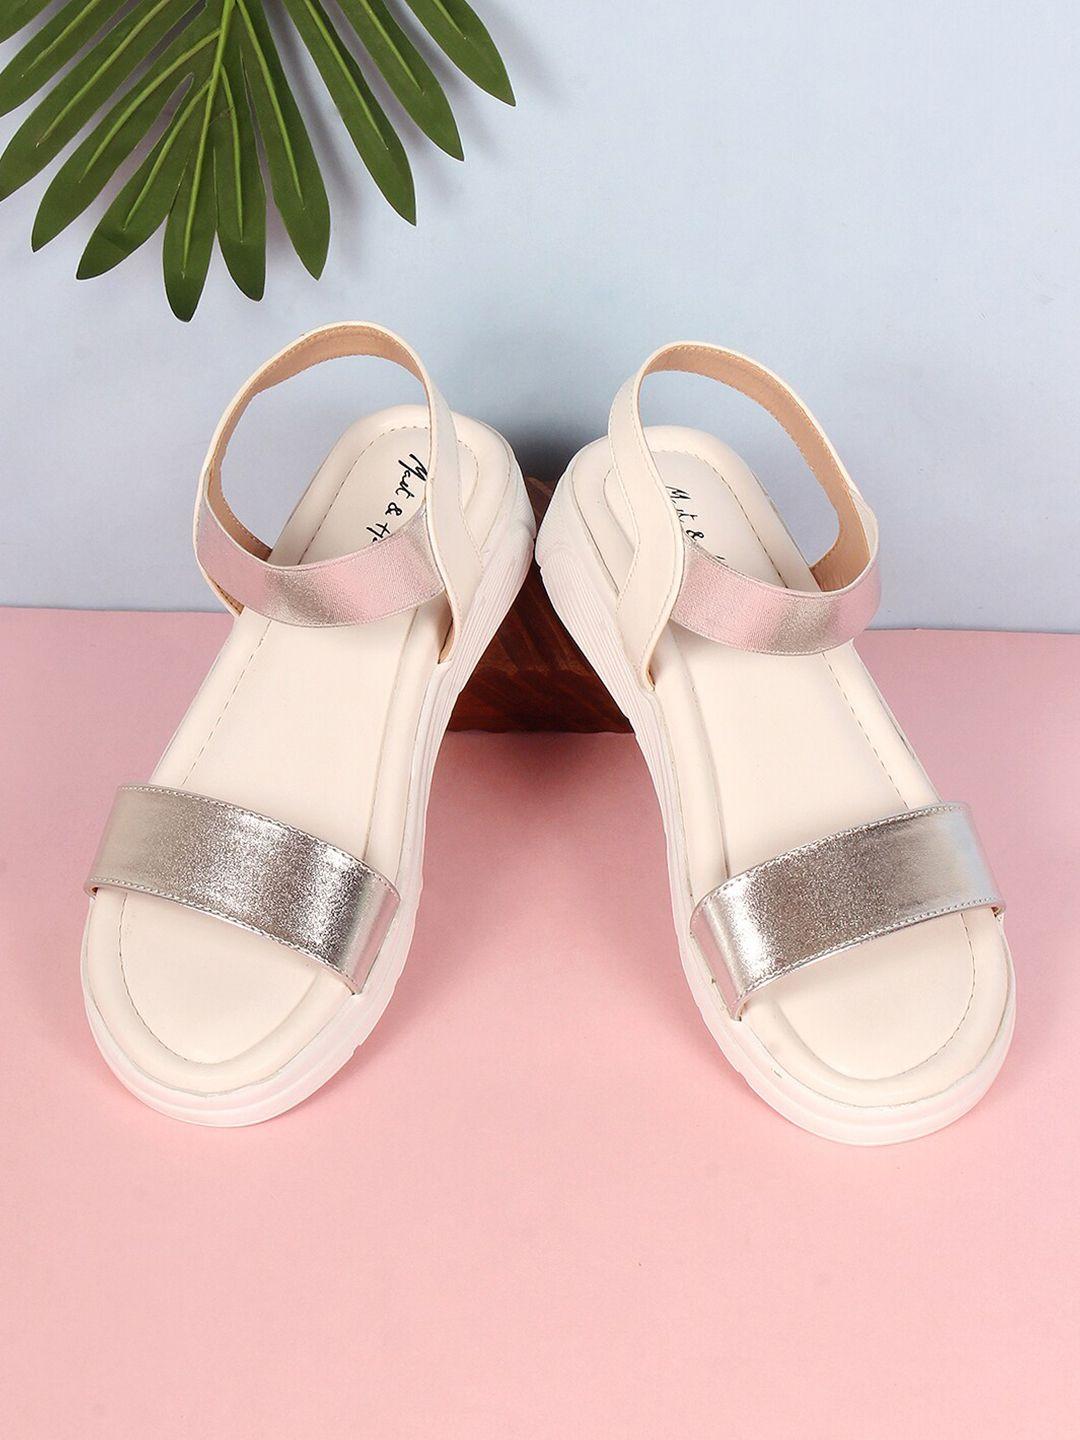 mast & harbour silver-toned and white open toe comfort heels